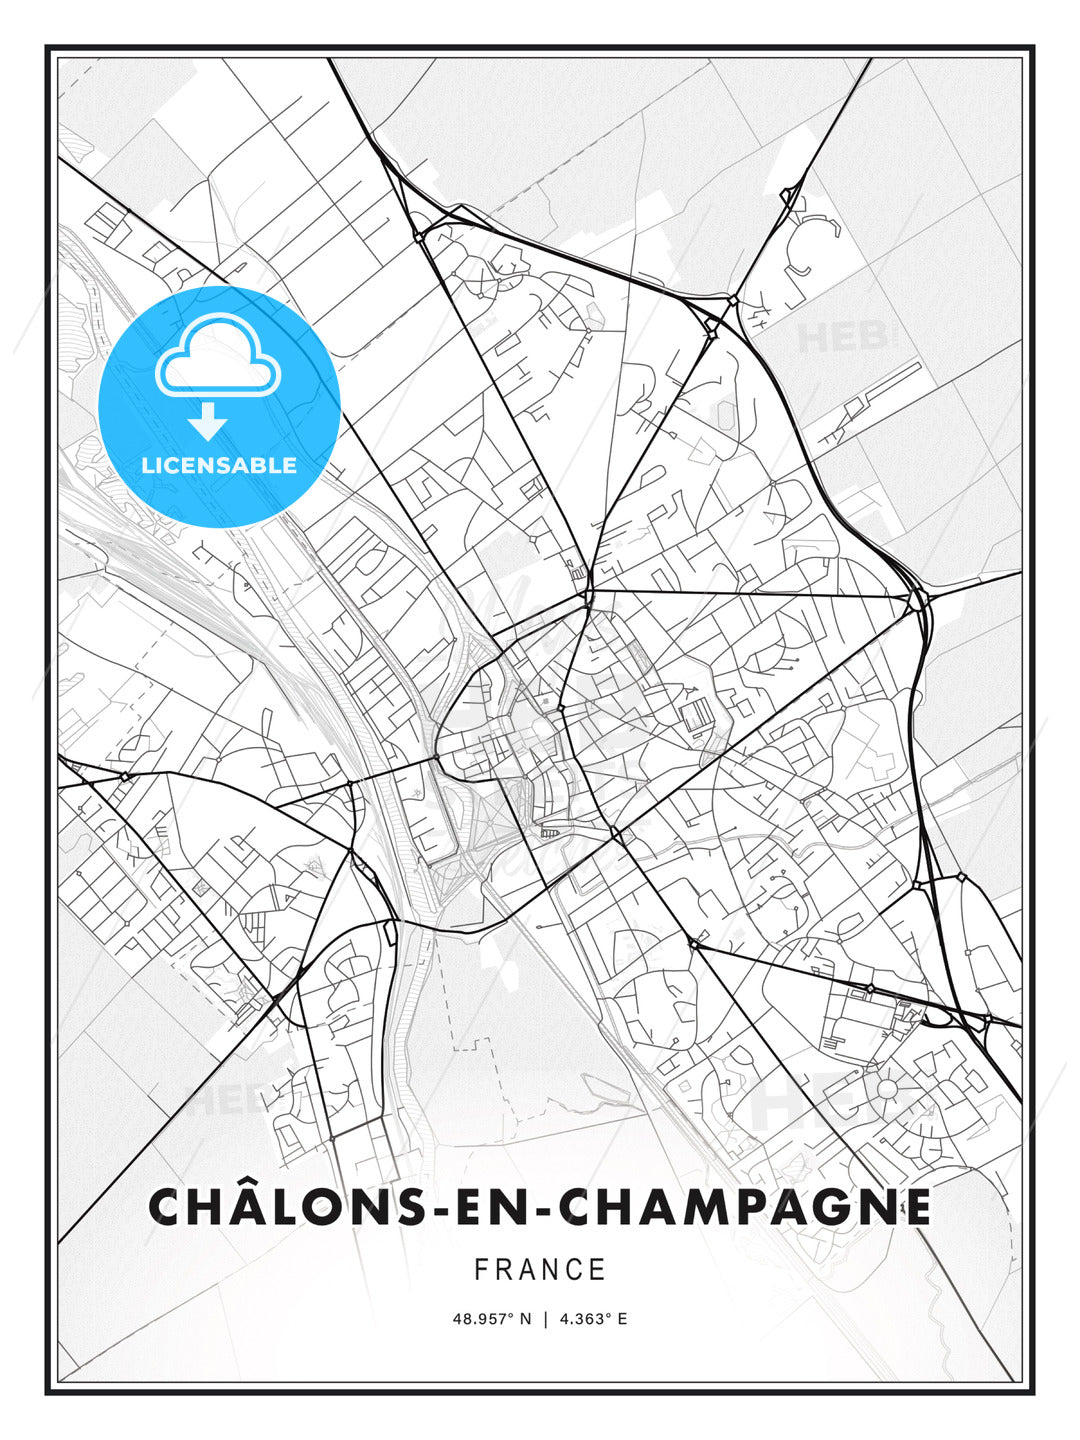 Châlons-en-Champagne, France, Modern Print Template in Various Formats - HEBSTREITS Sketches